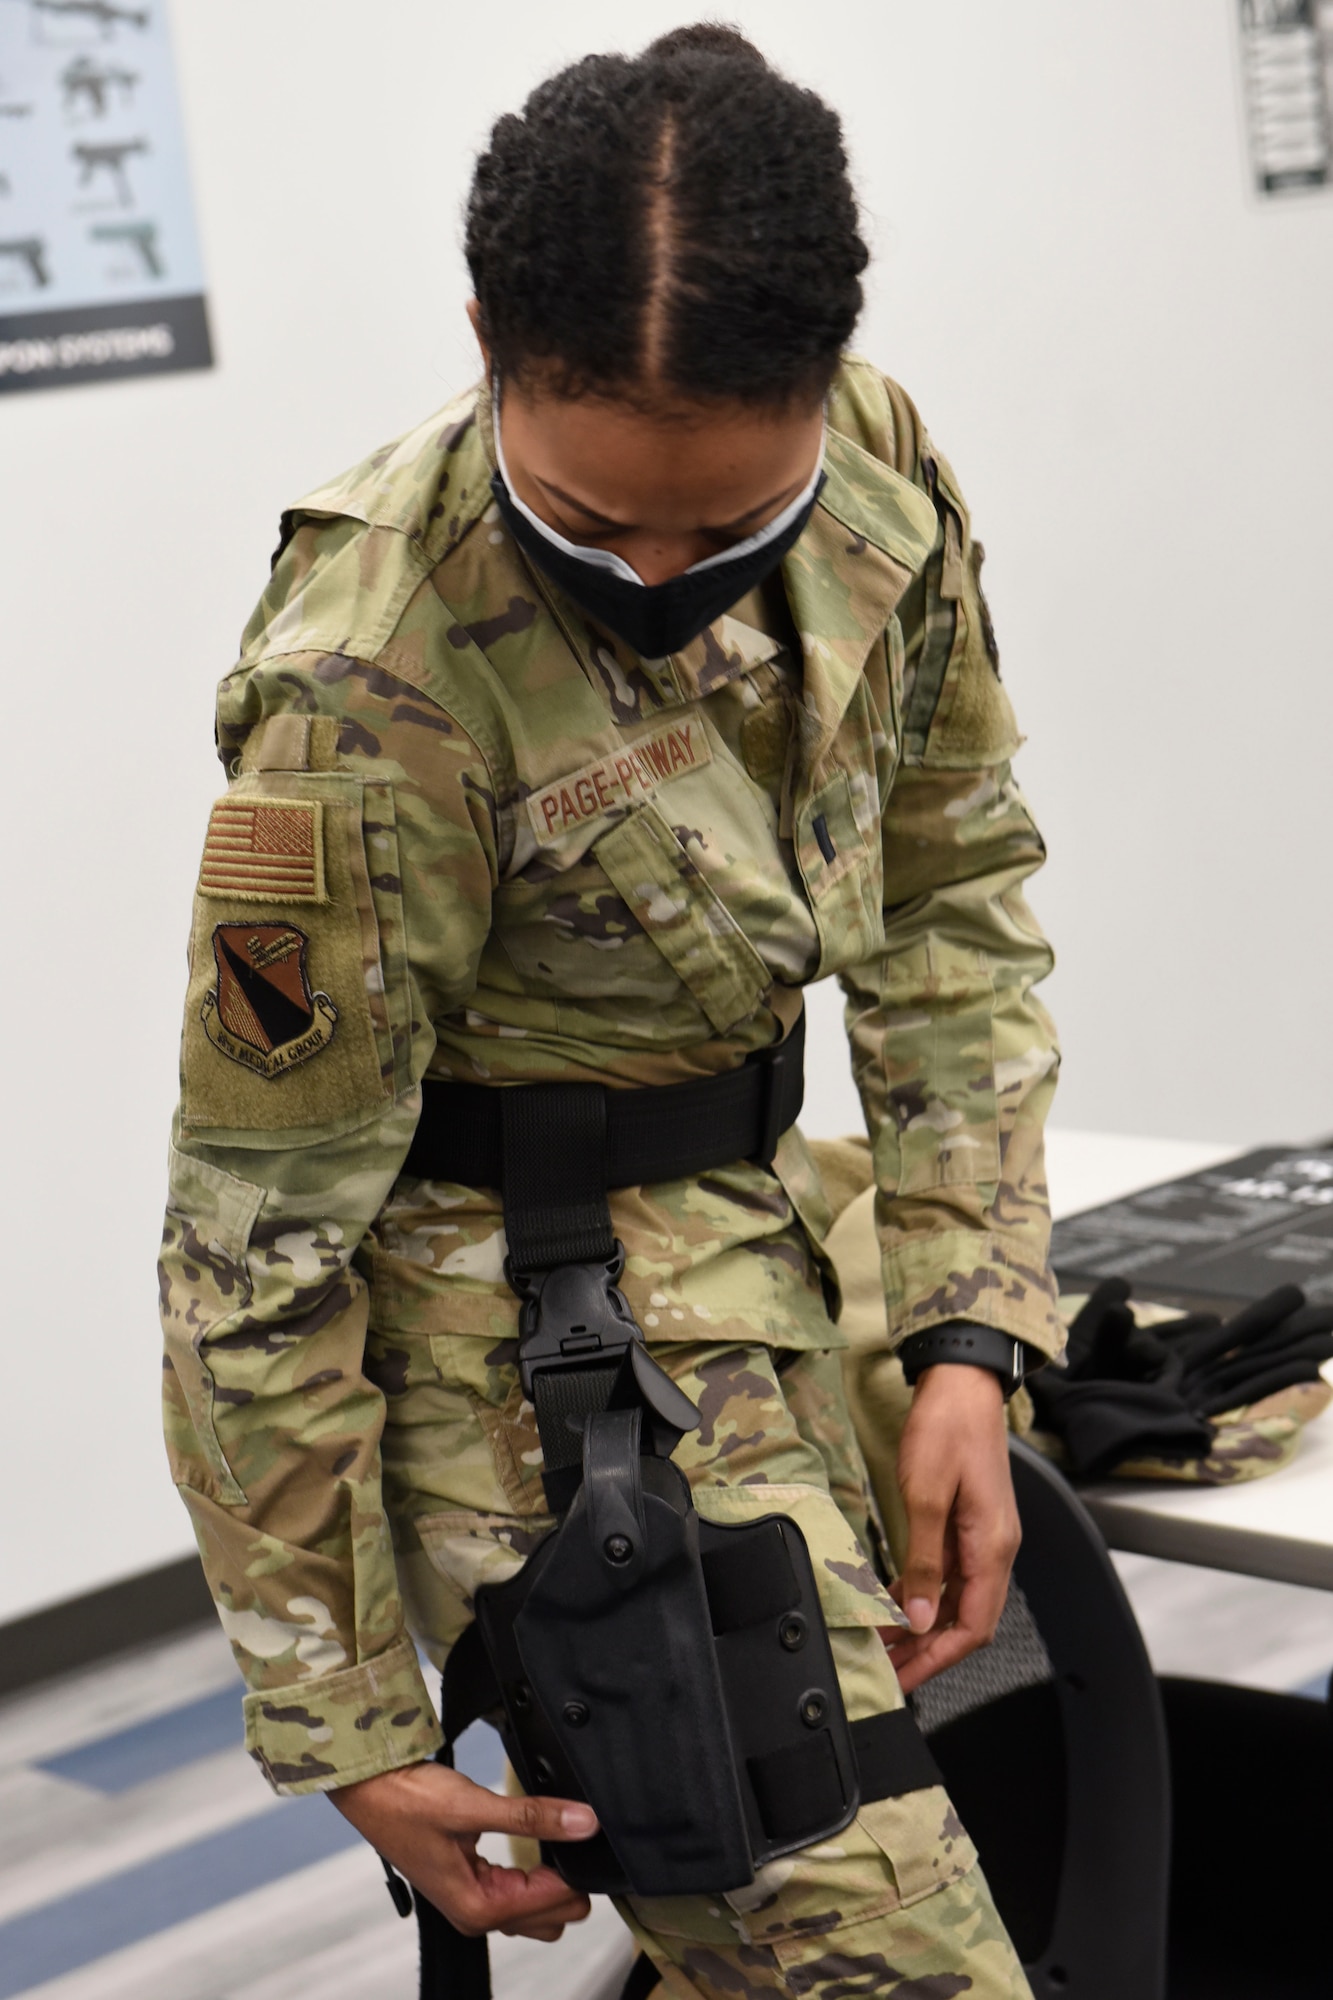 Air Force 1st Lt. Elisabeth Page-Pettiway an 88th Medical Group executive officer, straps on an M9 pistol holster during a qualification course at Wright-Patterson Air Force Base, Ohio on Feb. 18, 2021. Weapons qualification is part of the readiness standards for the 88th Air Base Wing. No live ammunition is allowed in the classroom portion of the qualification course. (U.S. Air Force photo by Ty Greenlees)